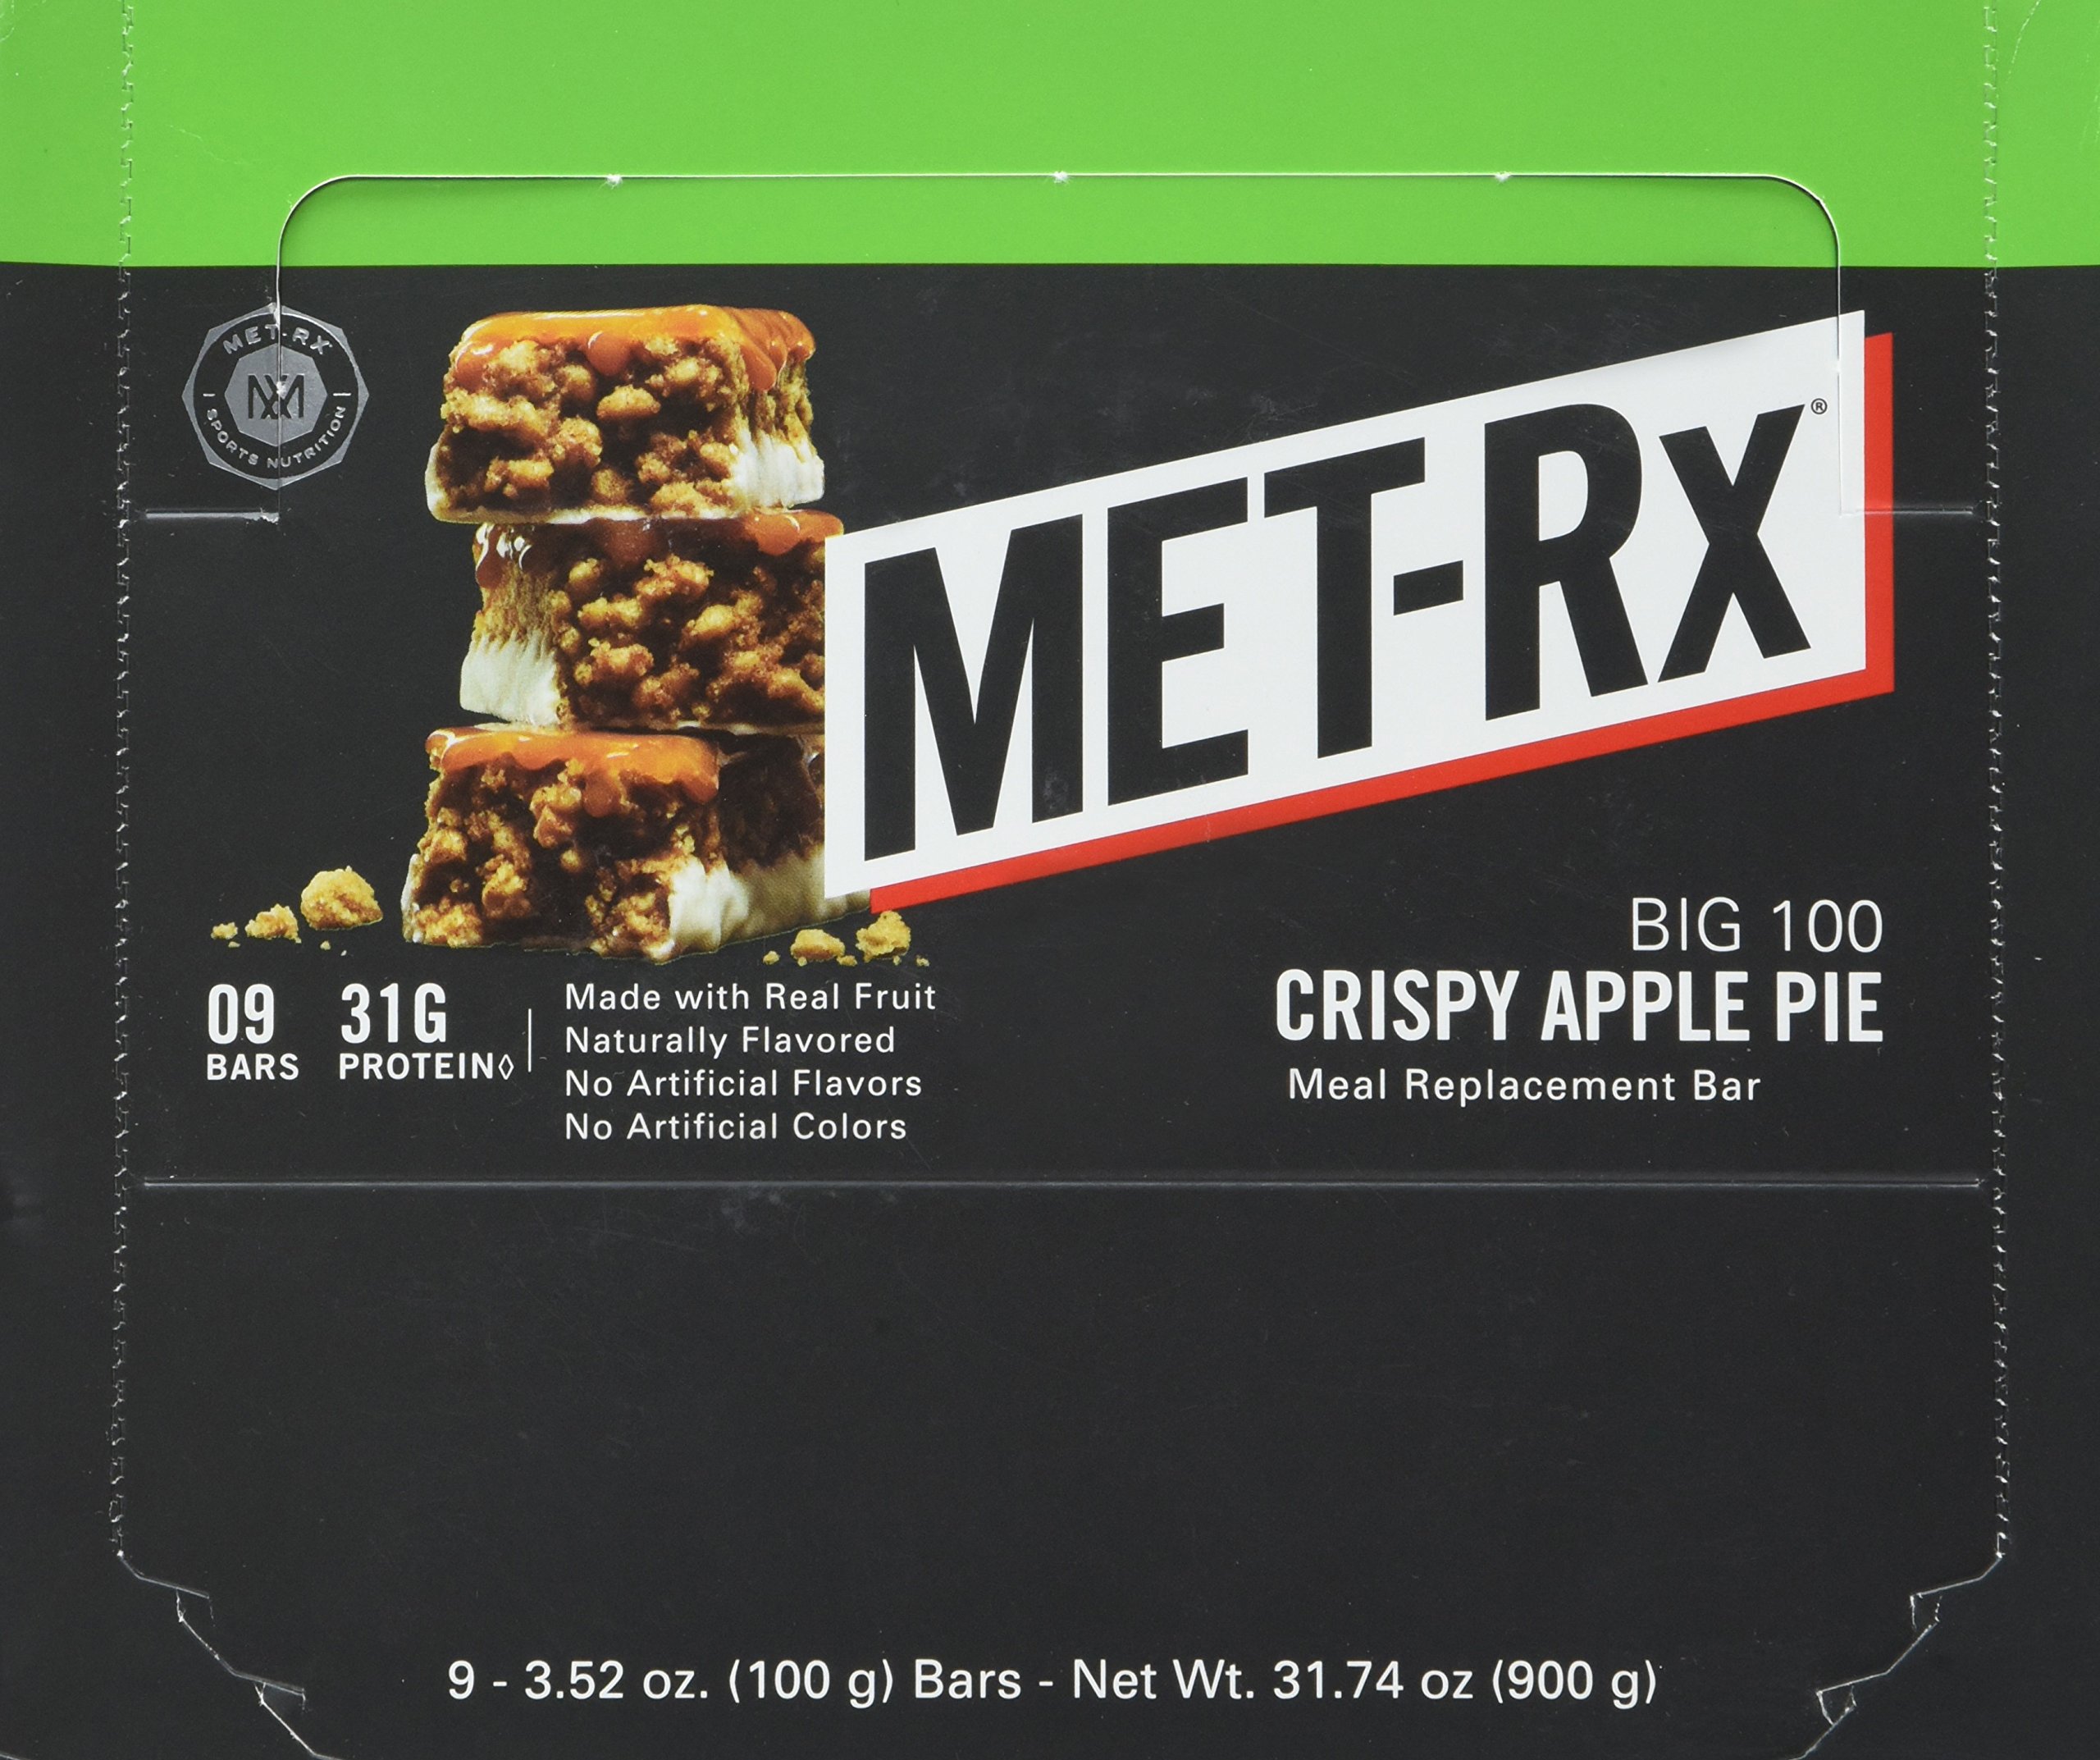 Met-Rx Big 100 Colossal Apple Pie, 9 Count